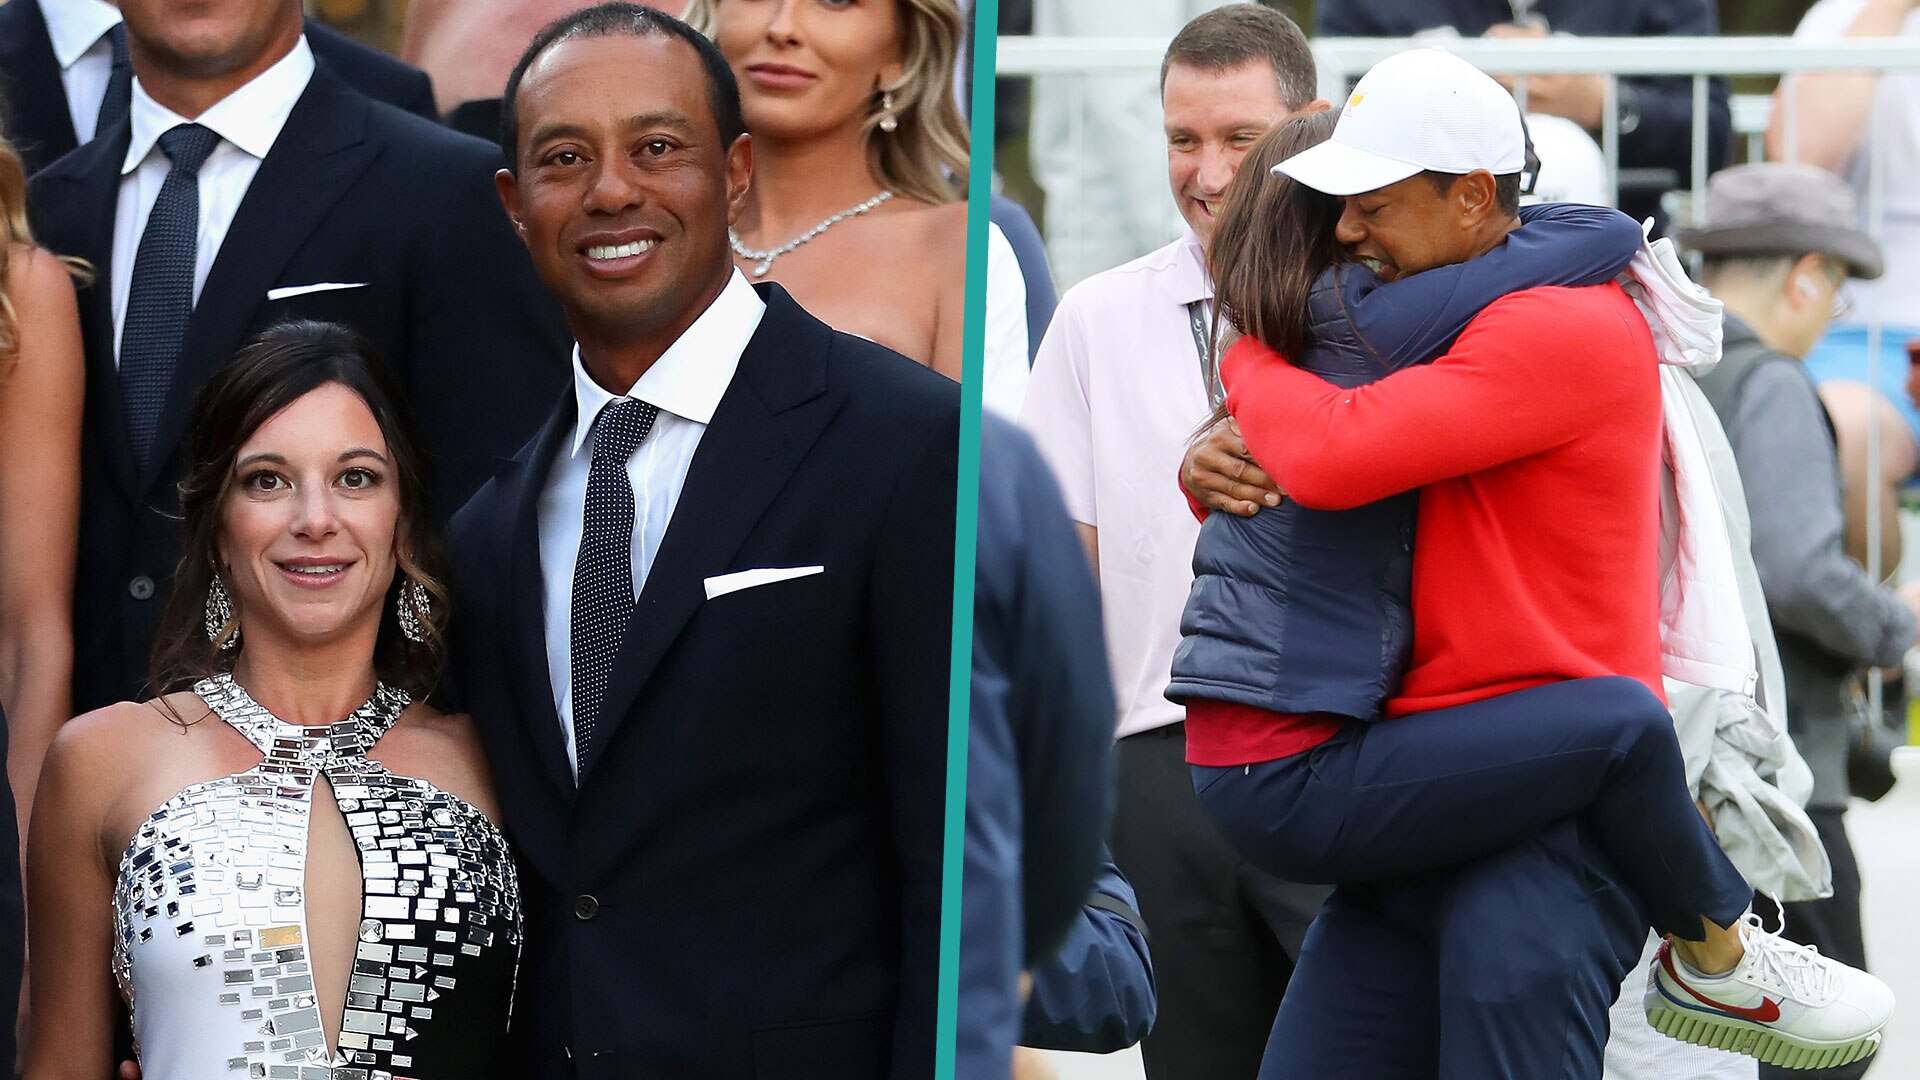 Inside Tiger Woods Relationship With Erica Herman As He Heads Into First Masters Following Crash